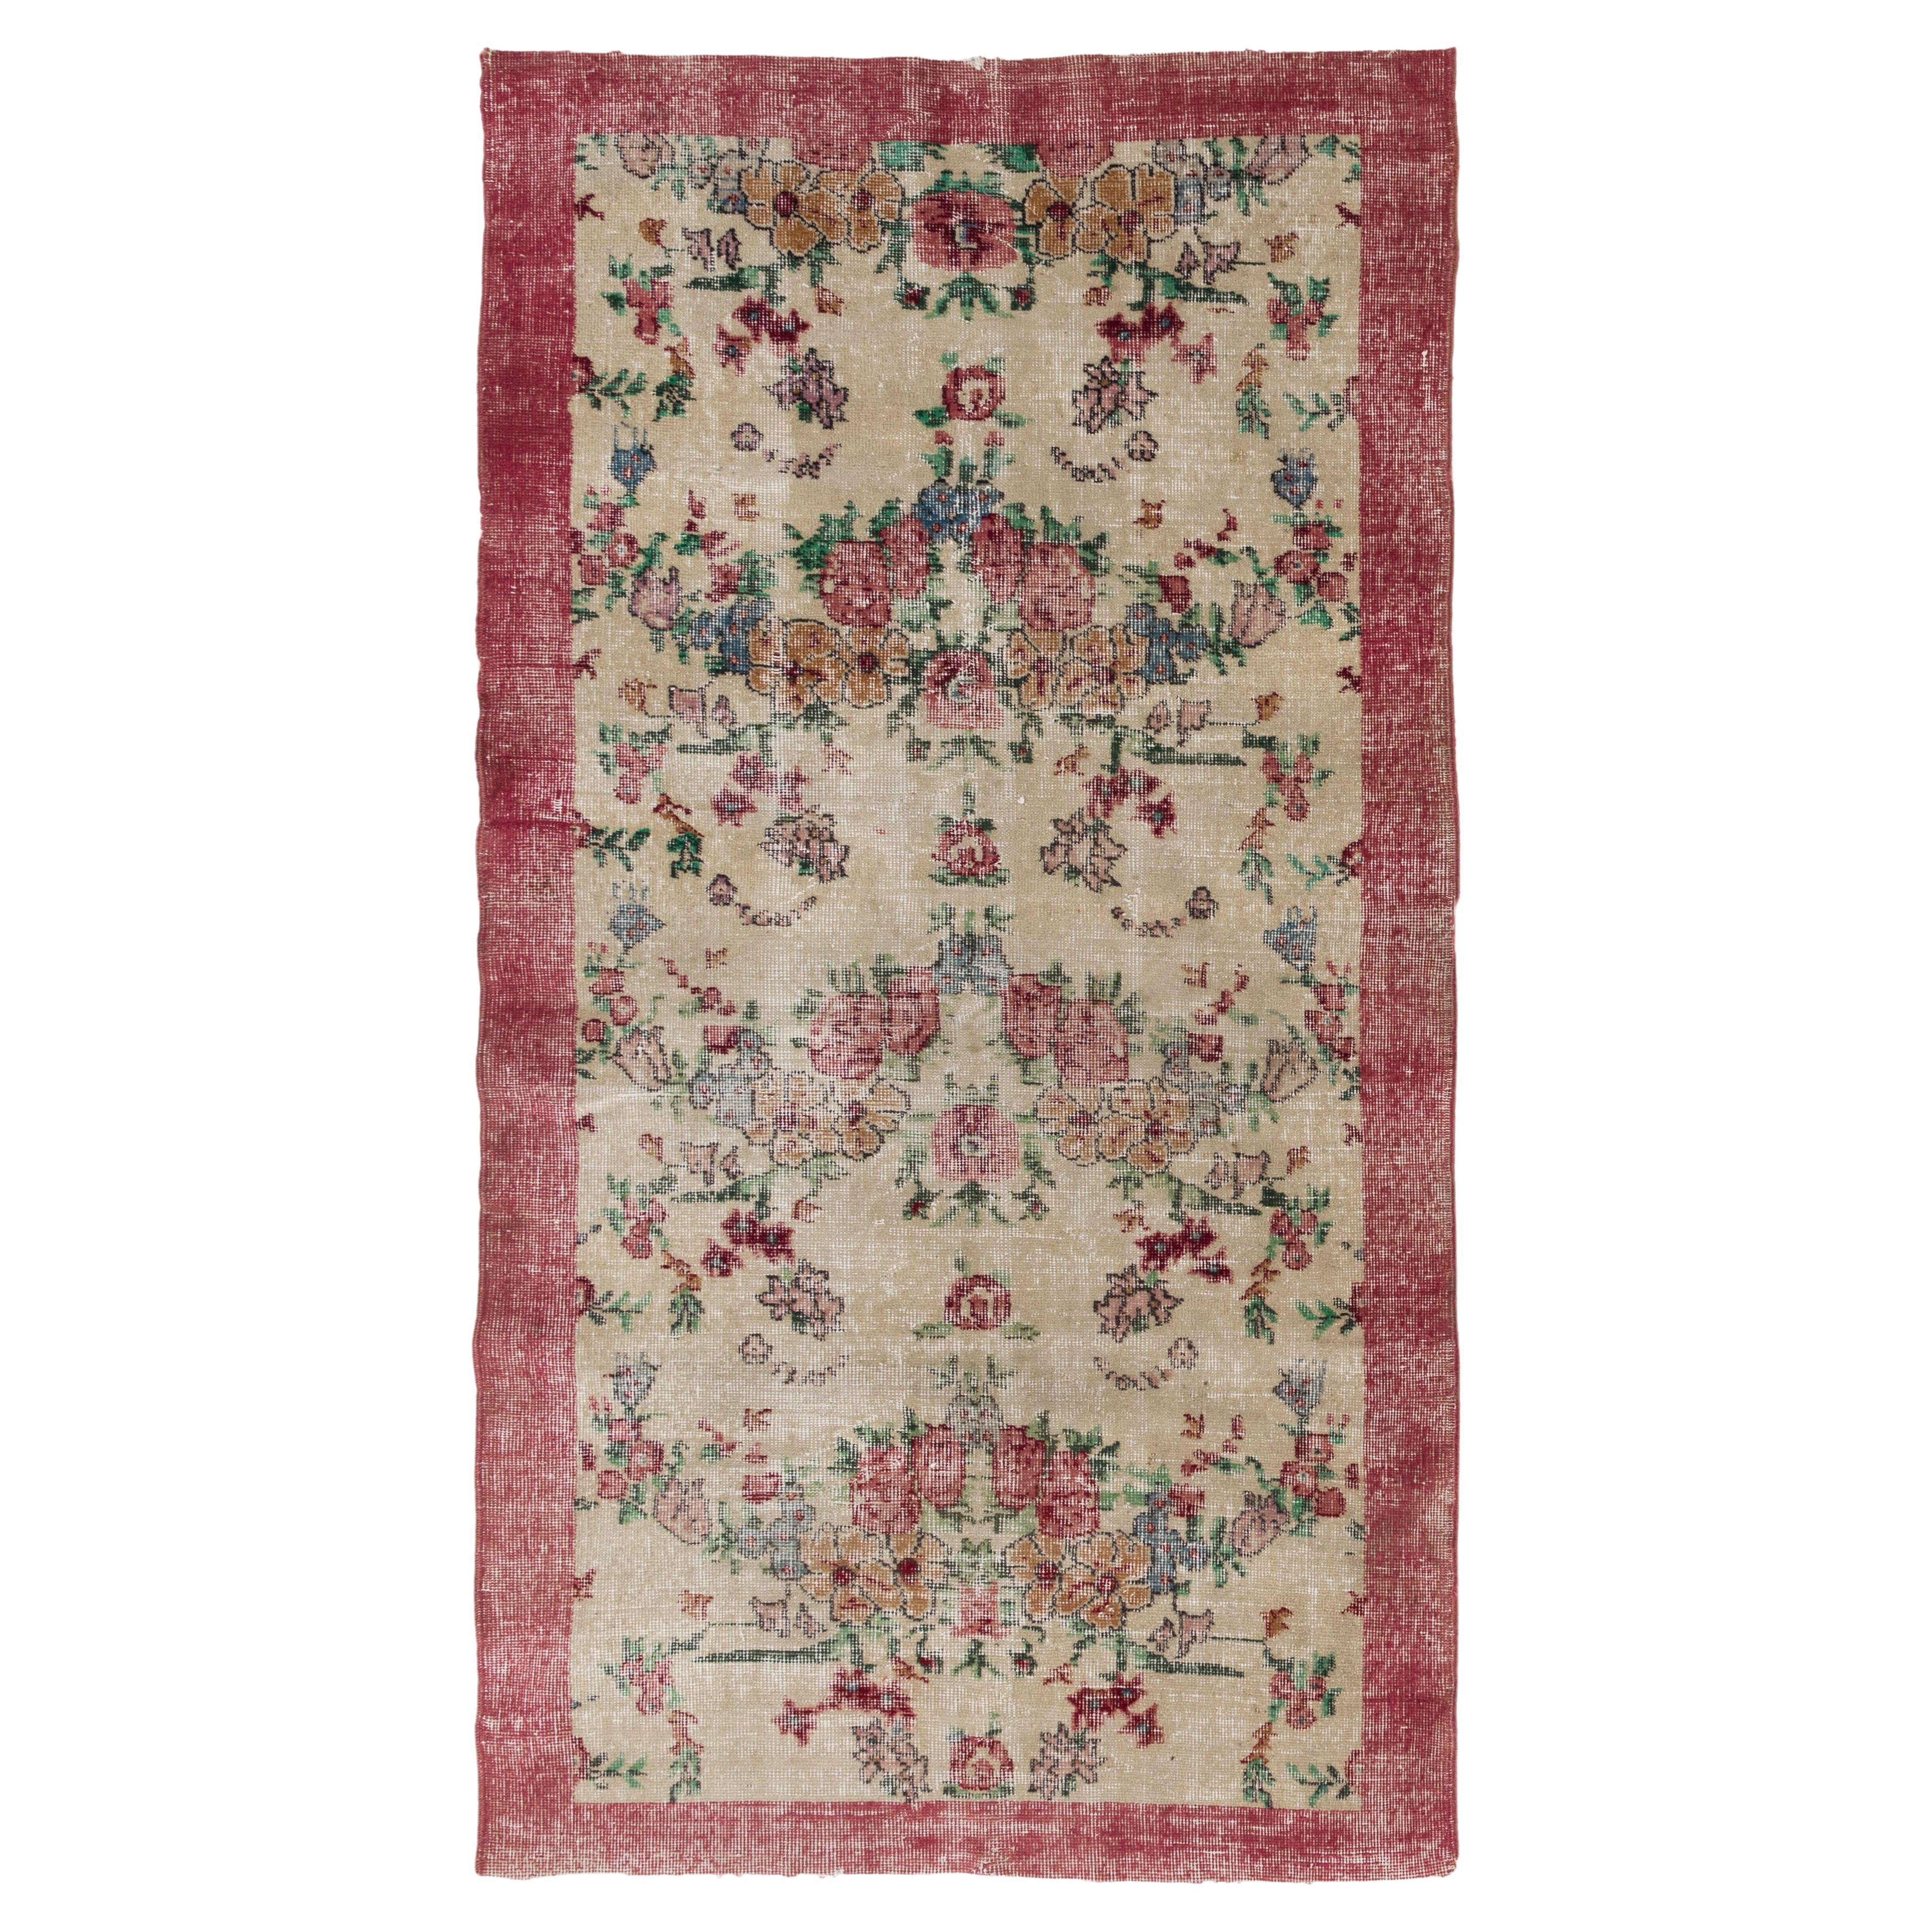 3.8x6.8 Ft Handmade Anatolian Floral Rug in Red & Beige with Low Wool Pile 